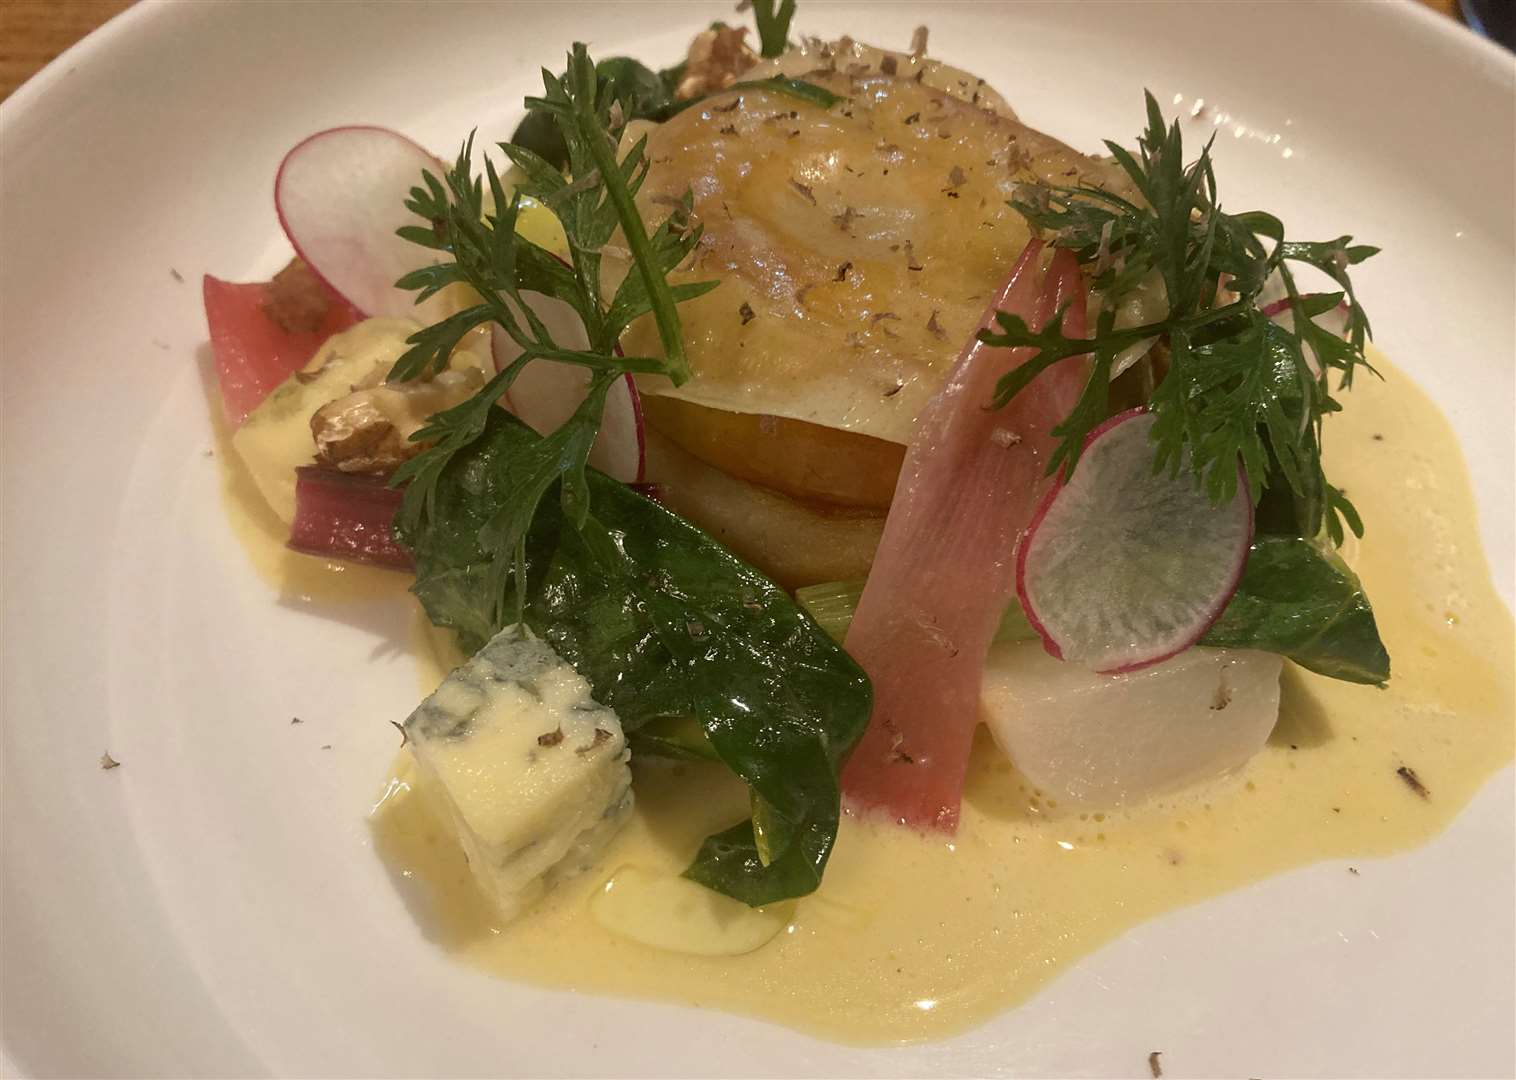 Celeriac and apple lasagna, blue chesse, walnuts and baby vegetables. Picture: Kev Hurst